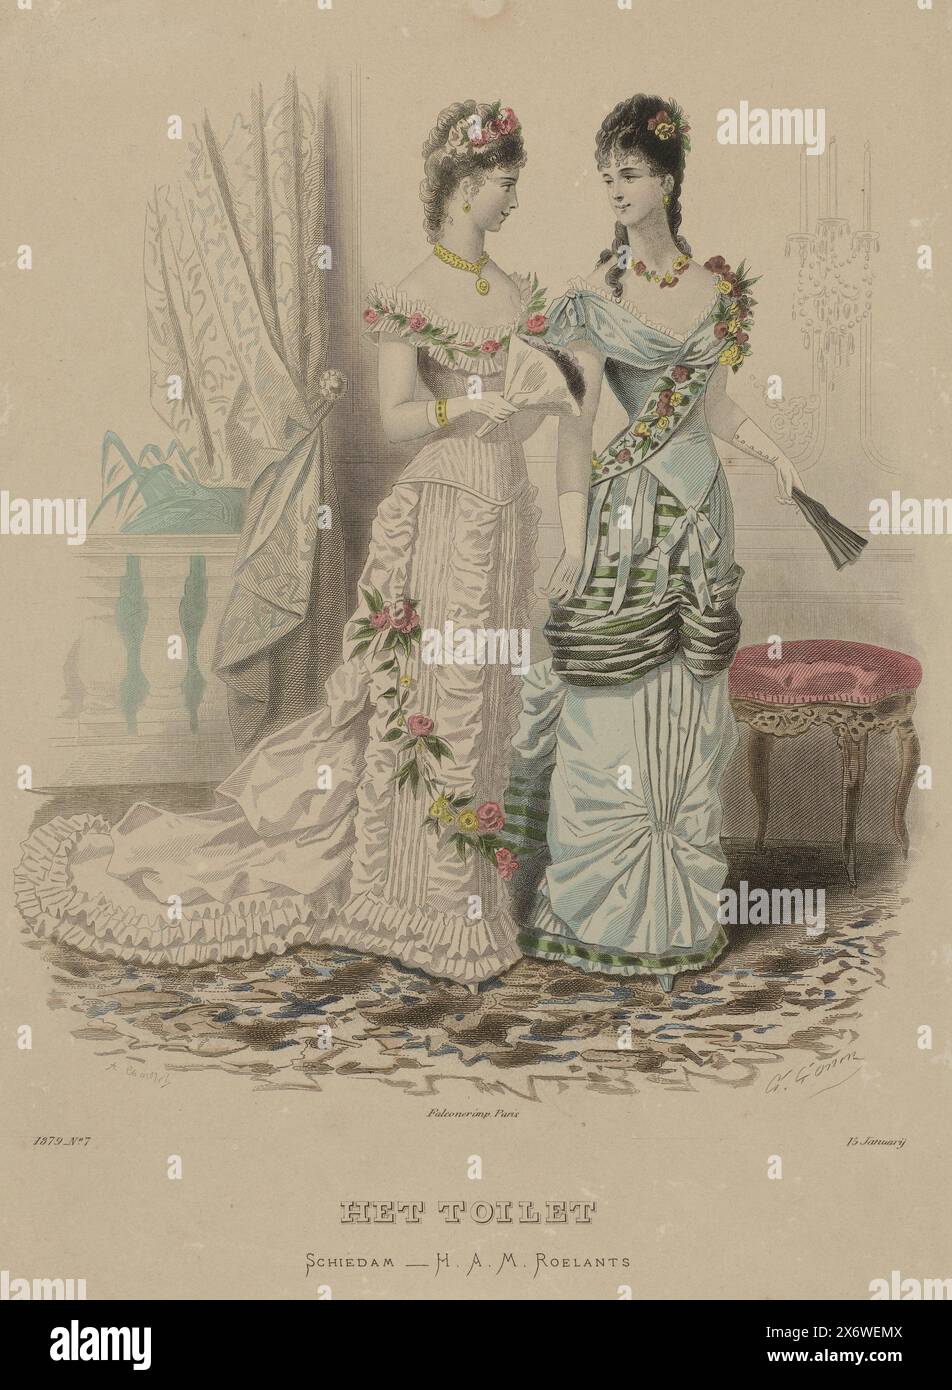 The Toilet, January 15, 1879, No. 7, Two women in an interior: on the left an evening gown with train, on the right a tight gown with garlands. Print from the fashion magazine Het Toilet (1877-?)., print maker: A. Chaillot, (mentioned on object), after design by: Guido Gonin, (mentioned on object), publisher: Hendrik Adriaan Marius Roelants, (mentioned on object), publisher: Schiedam, printer: Paris, 1879, paper, engraving, height c. 363 mm × width c. 262 mm Stock Photo